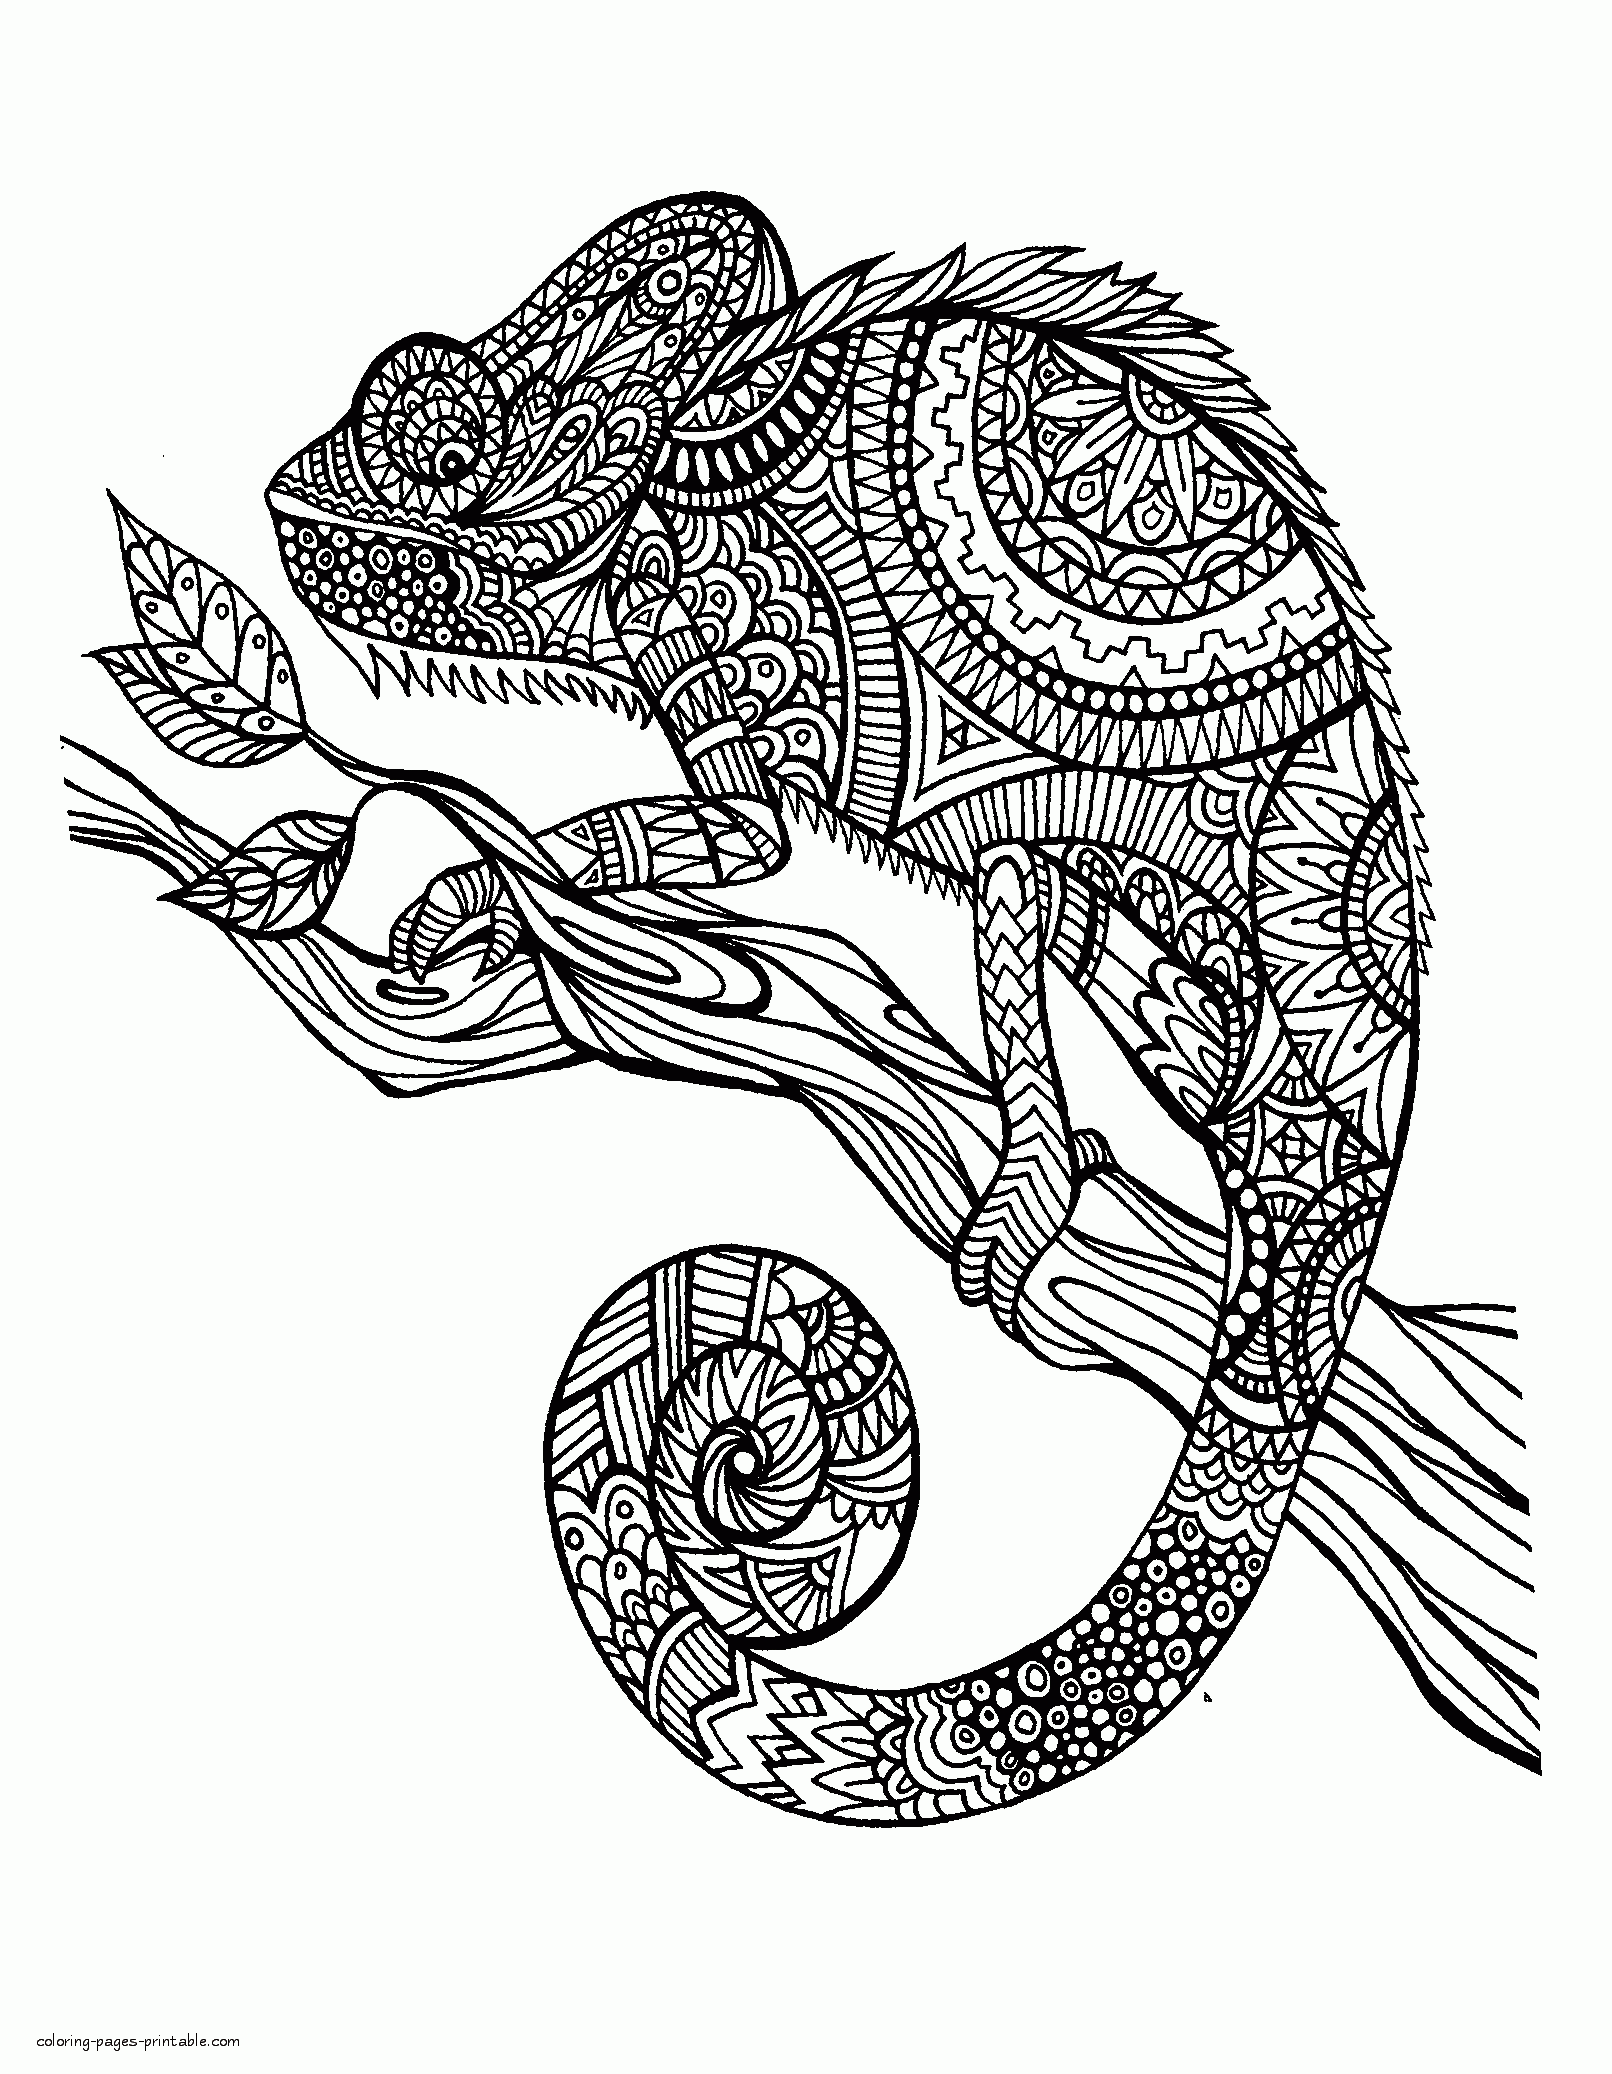 Chameleon Coloring Sheet For Adults